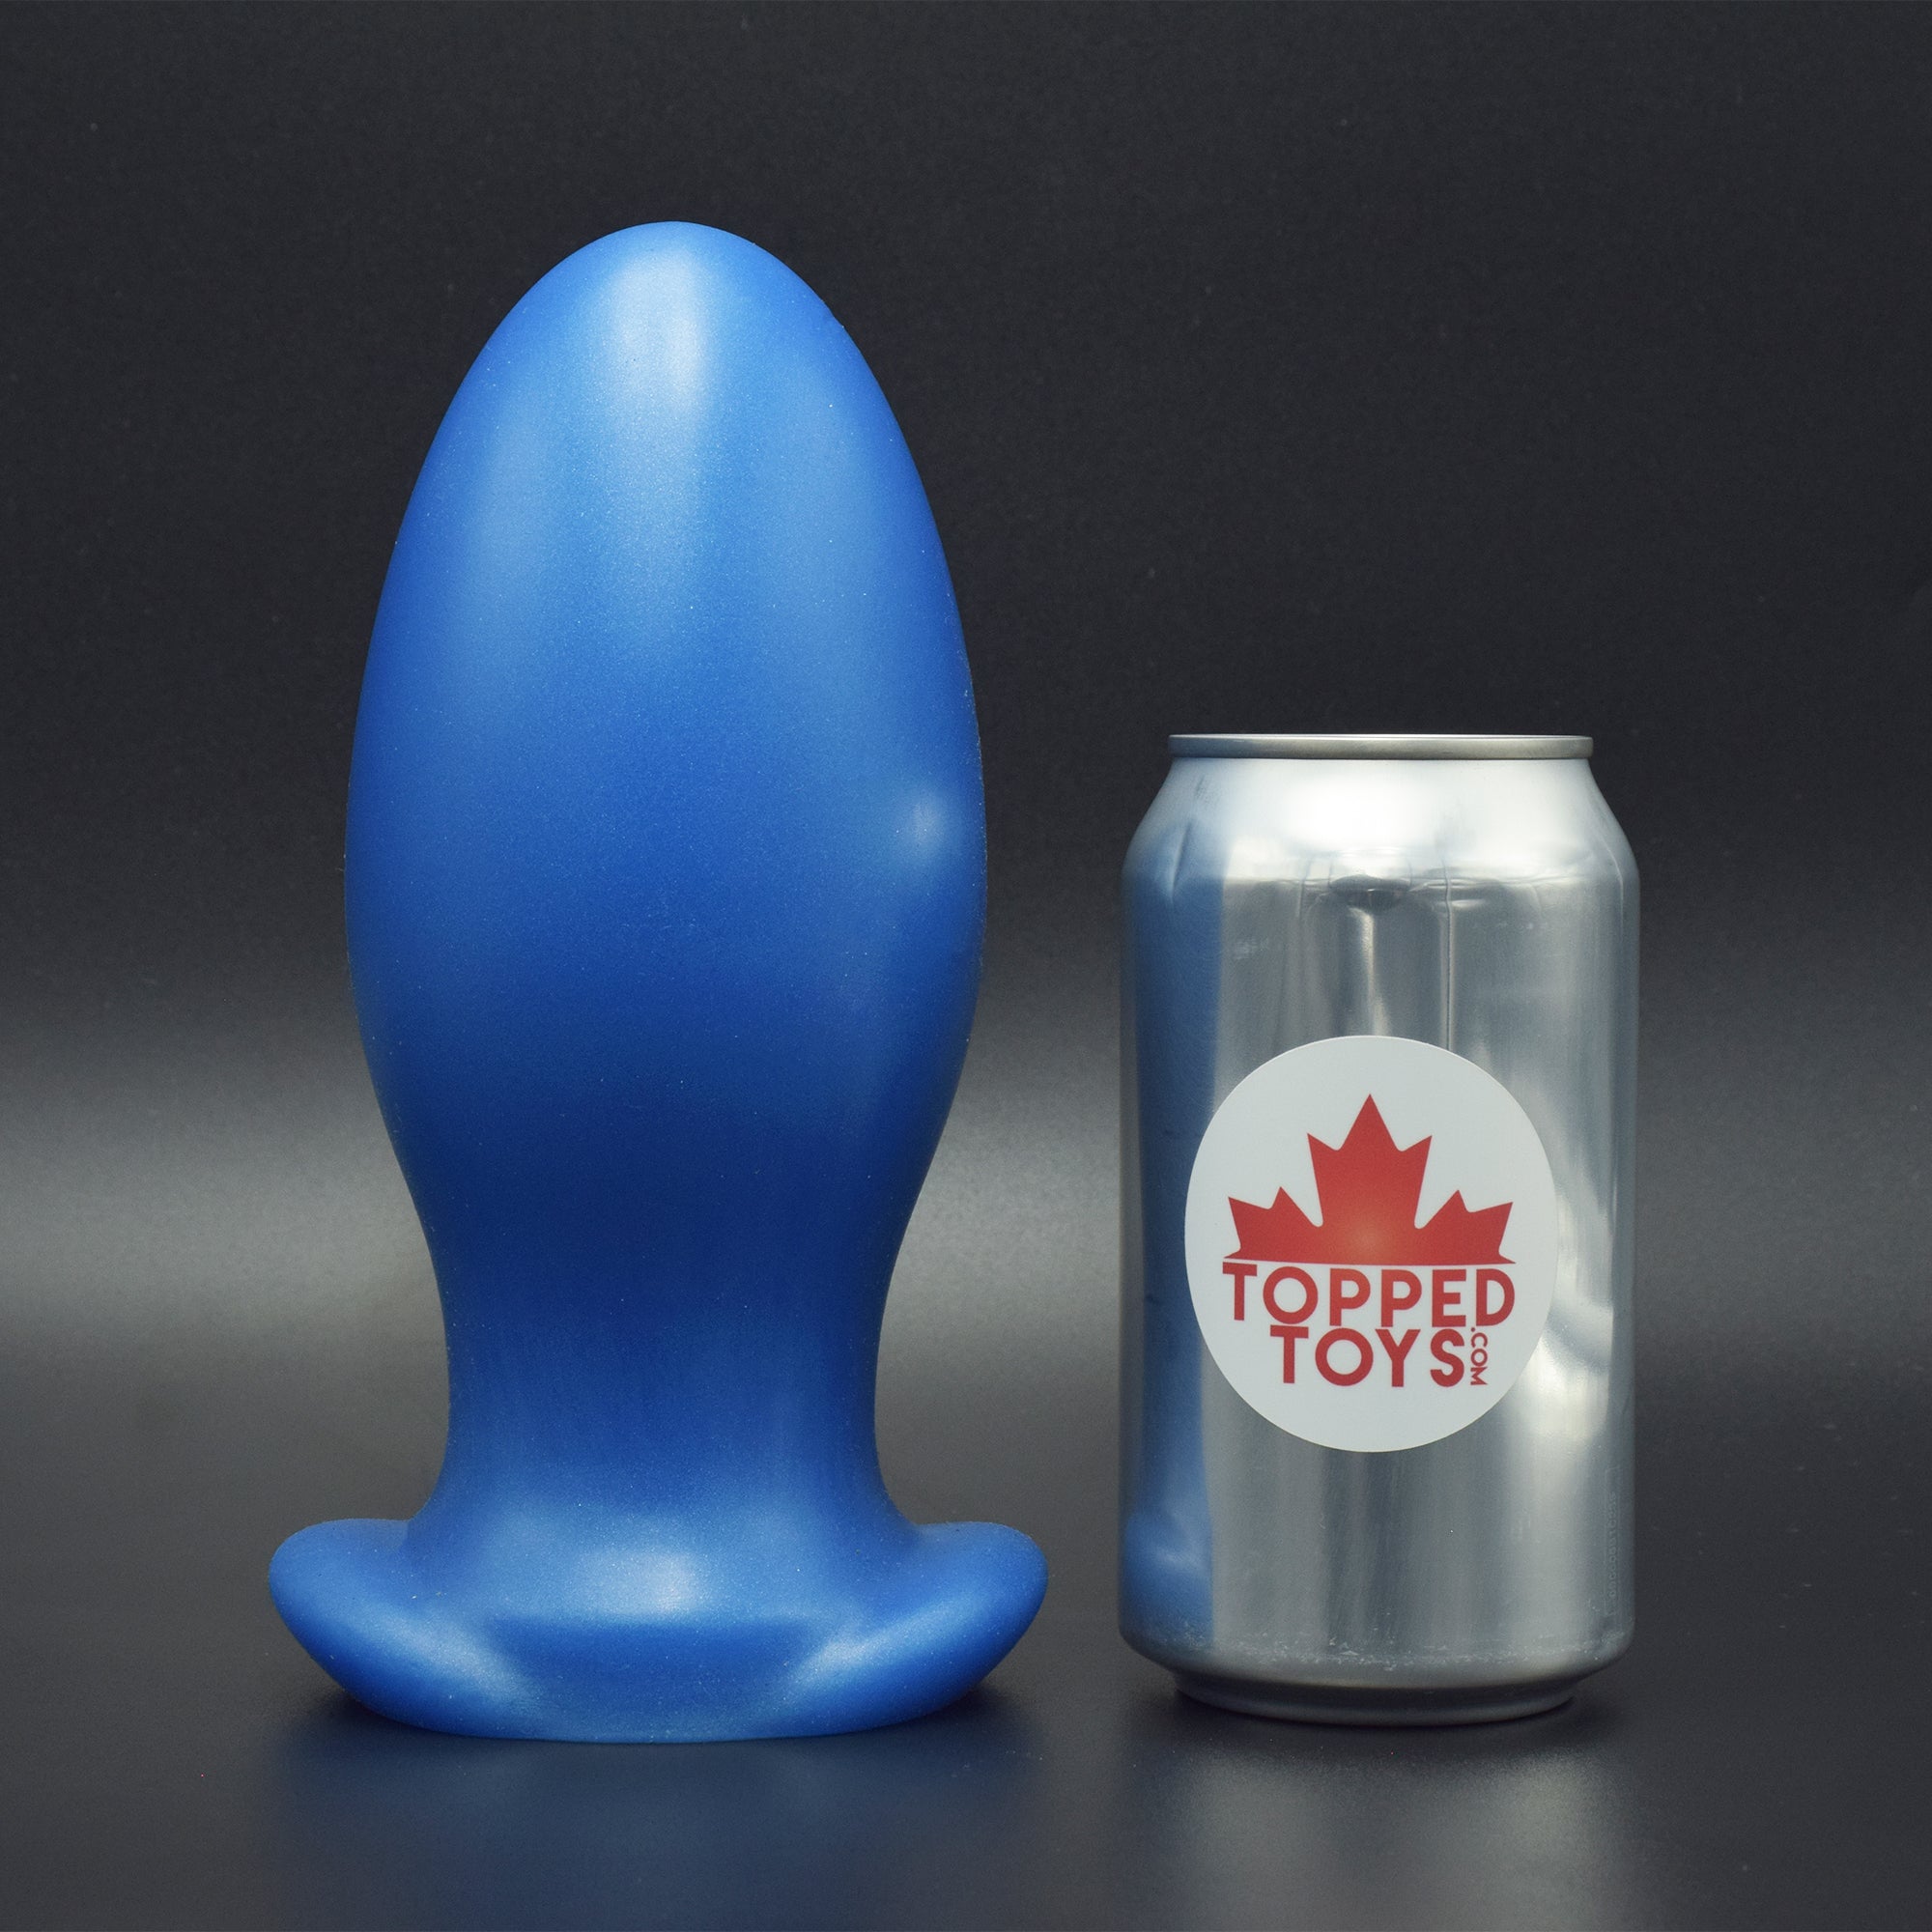 Gape Keeper 100 in Blue Steel standing up, next to pop can with Topped Toys logo